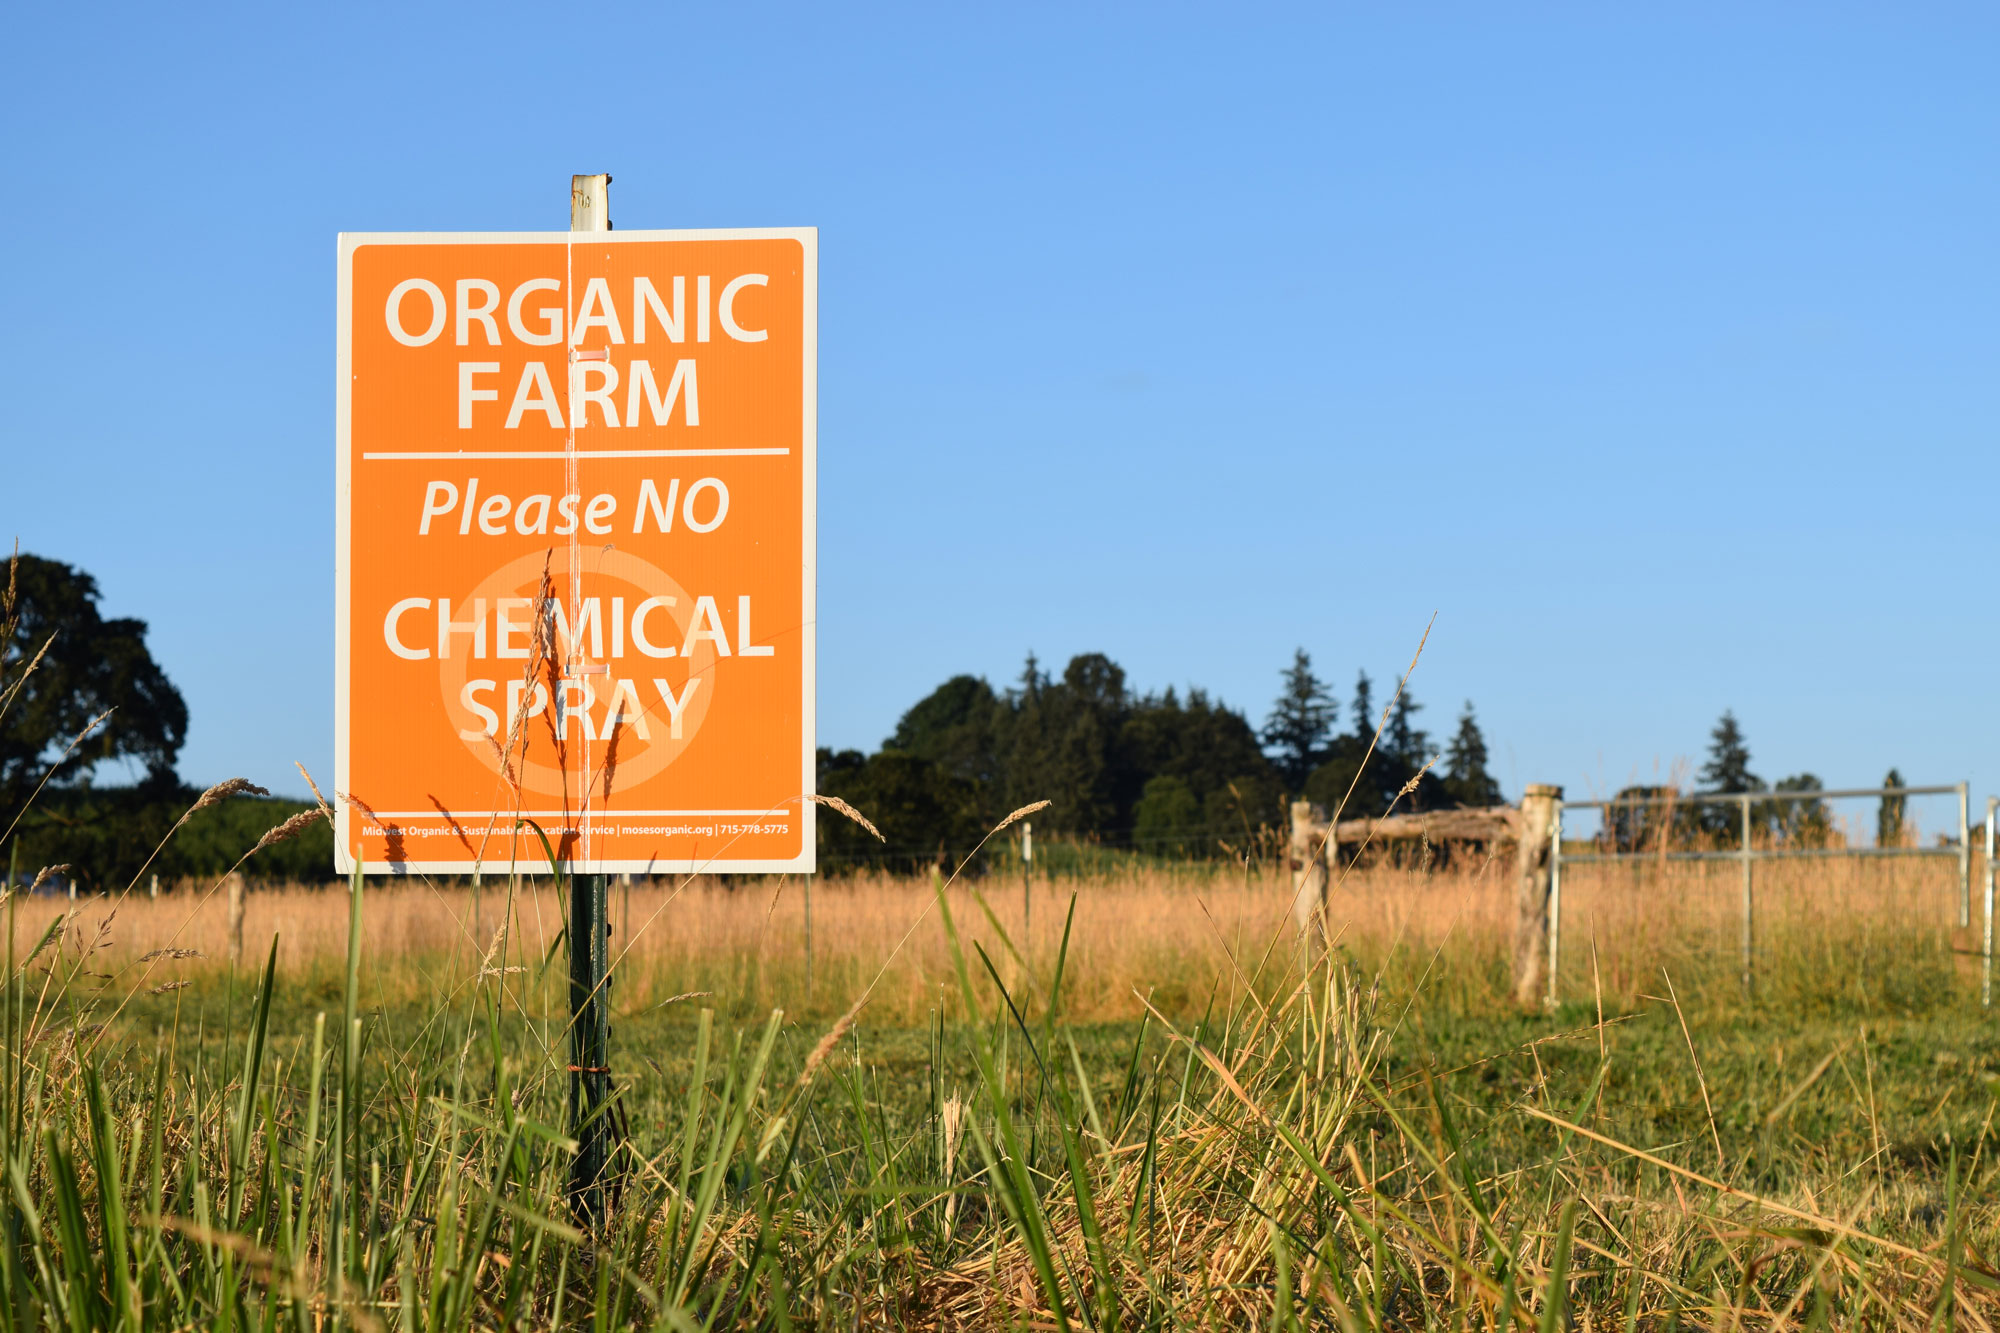 Organic farming sign in agricultural field.